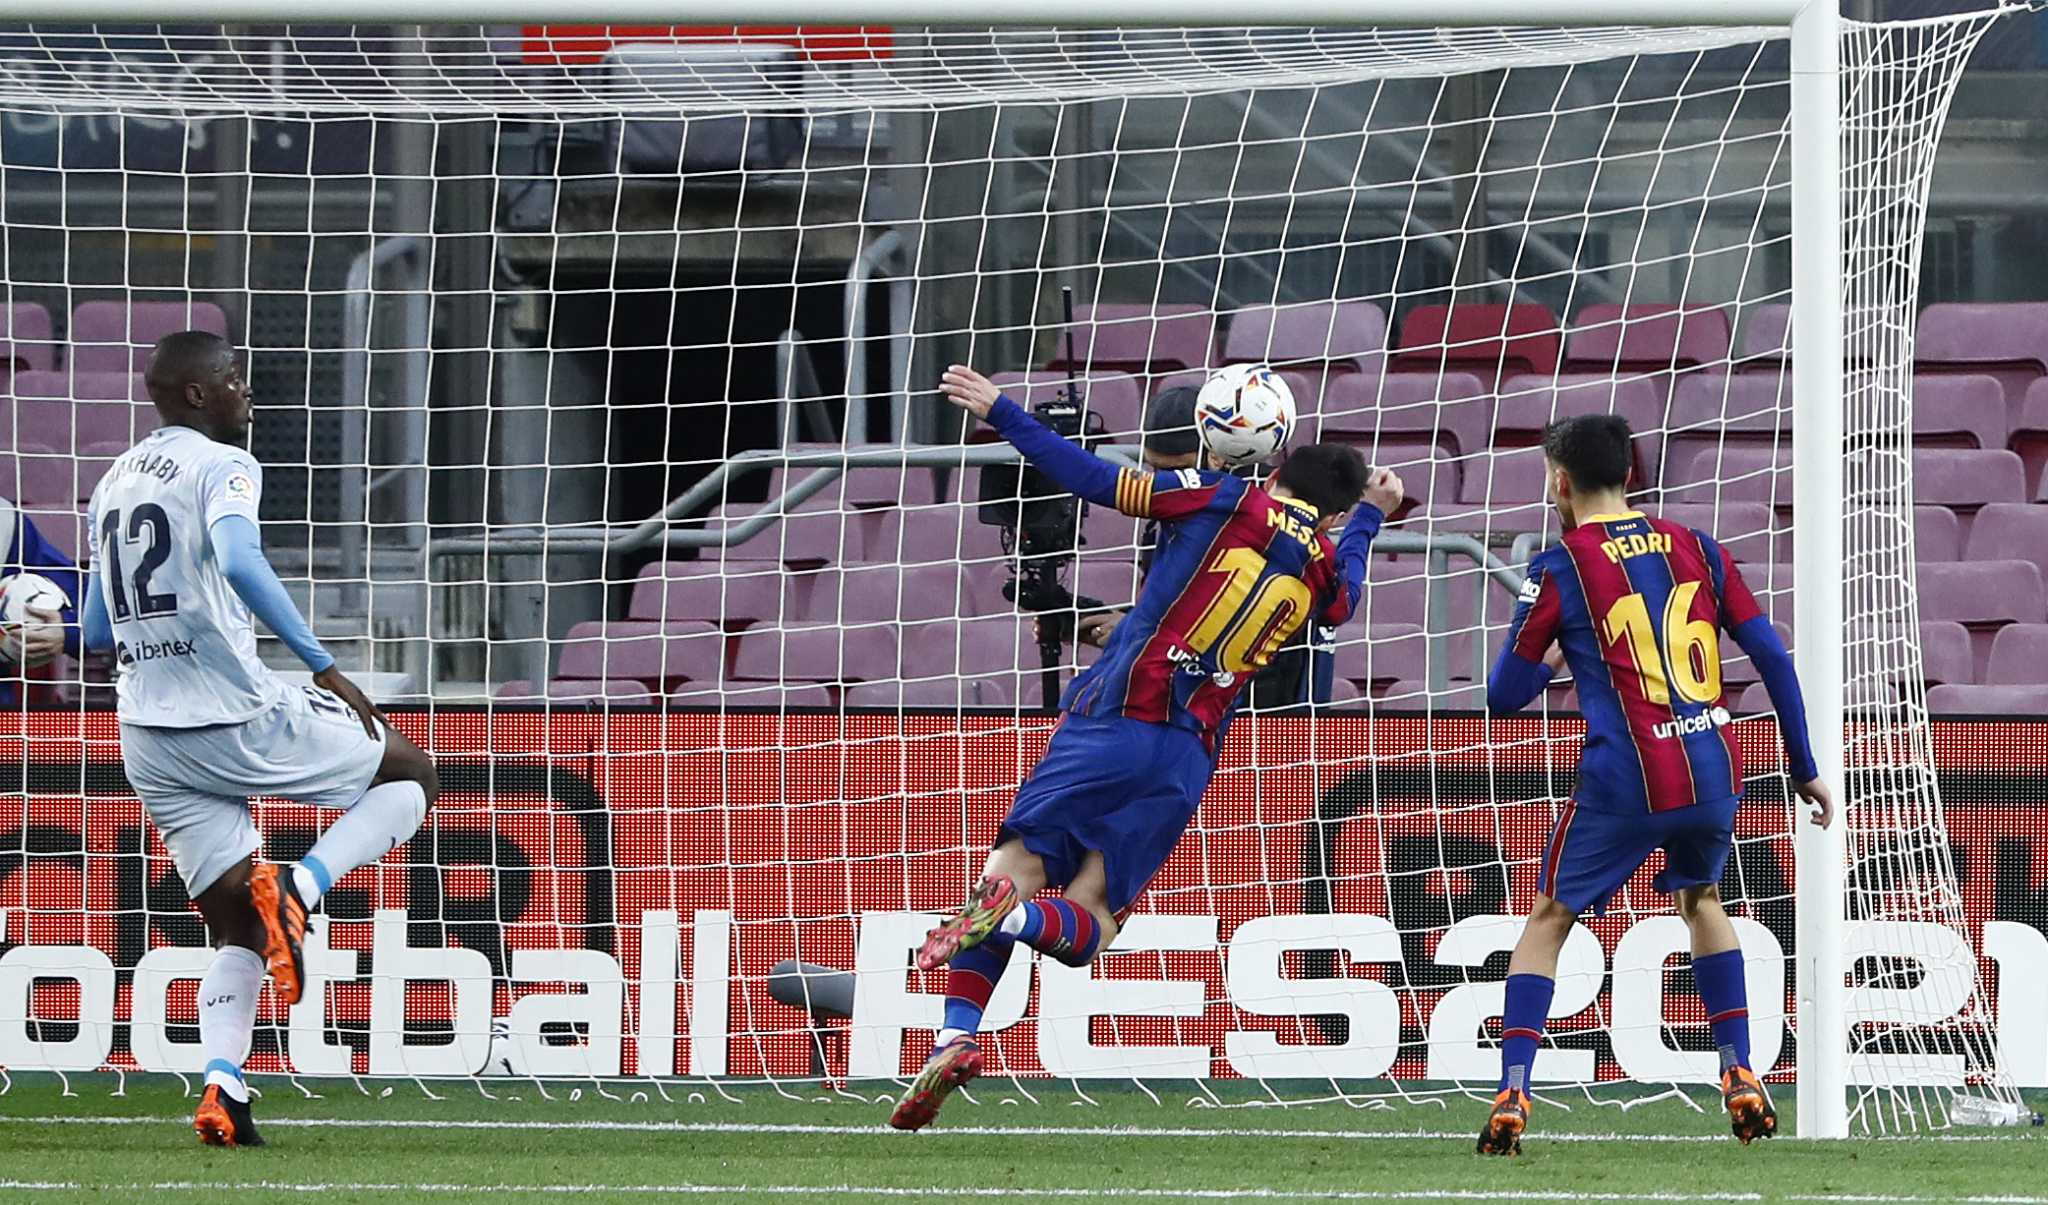 Messi equals 643 goals for Pele with Barcelona for Valencia

